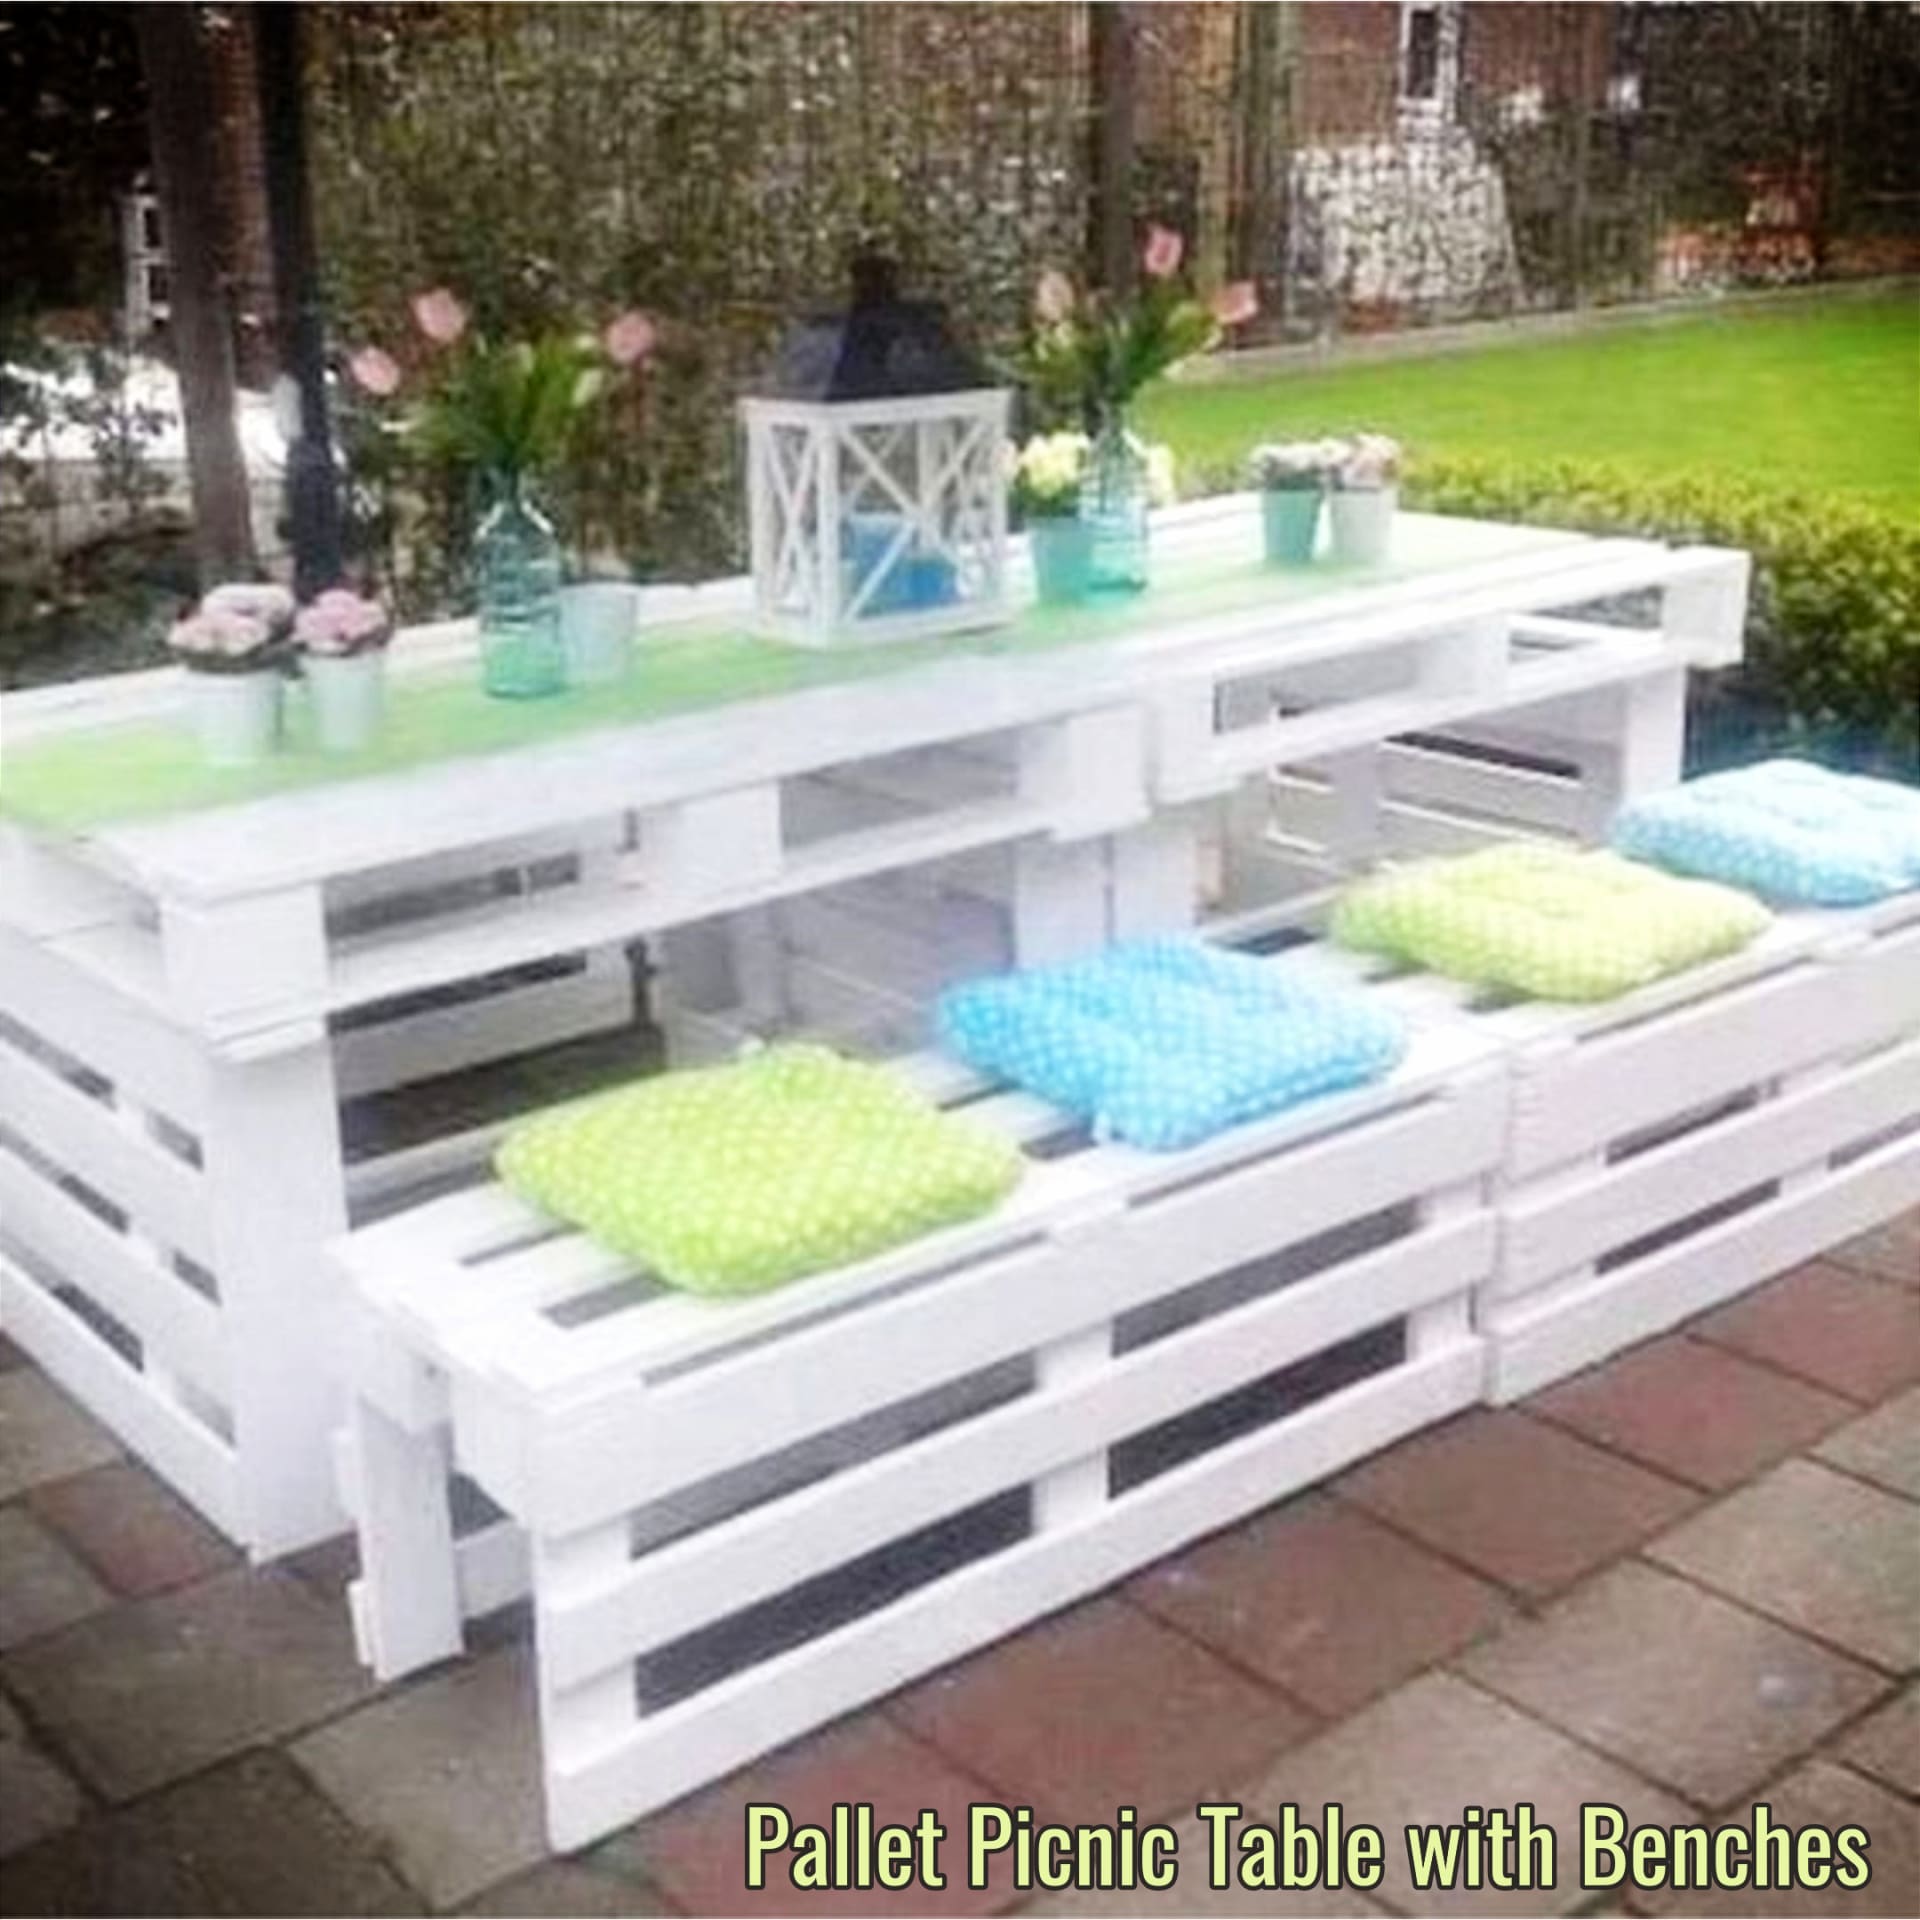 Pallet Projects - Easy DIY outdoor pallet furniture and pallet projects to make or sell - VERY clever pallet projects!  Pallet picnic table with benches all made from old pallet wood